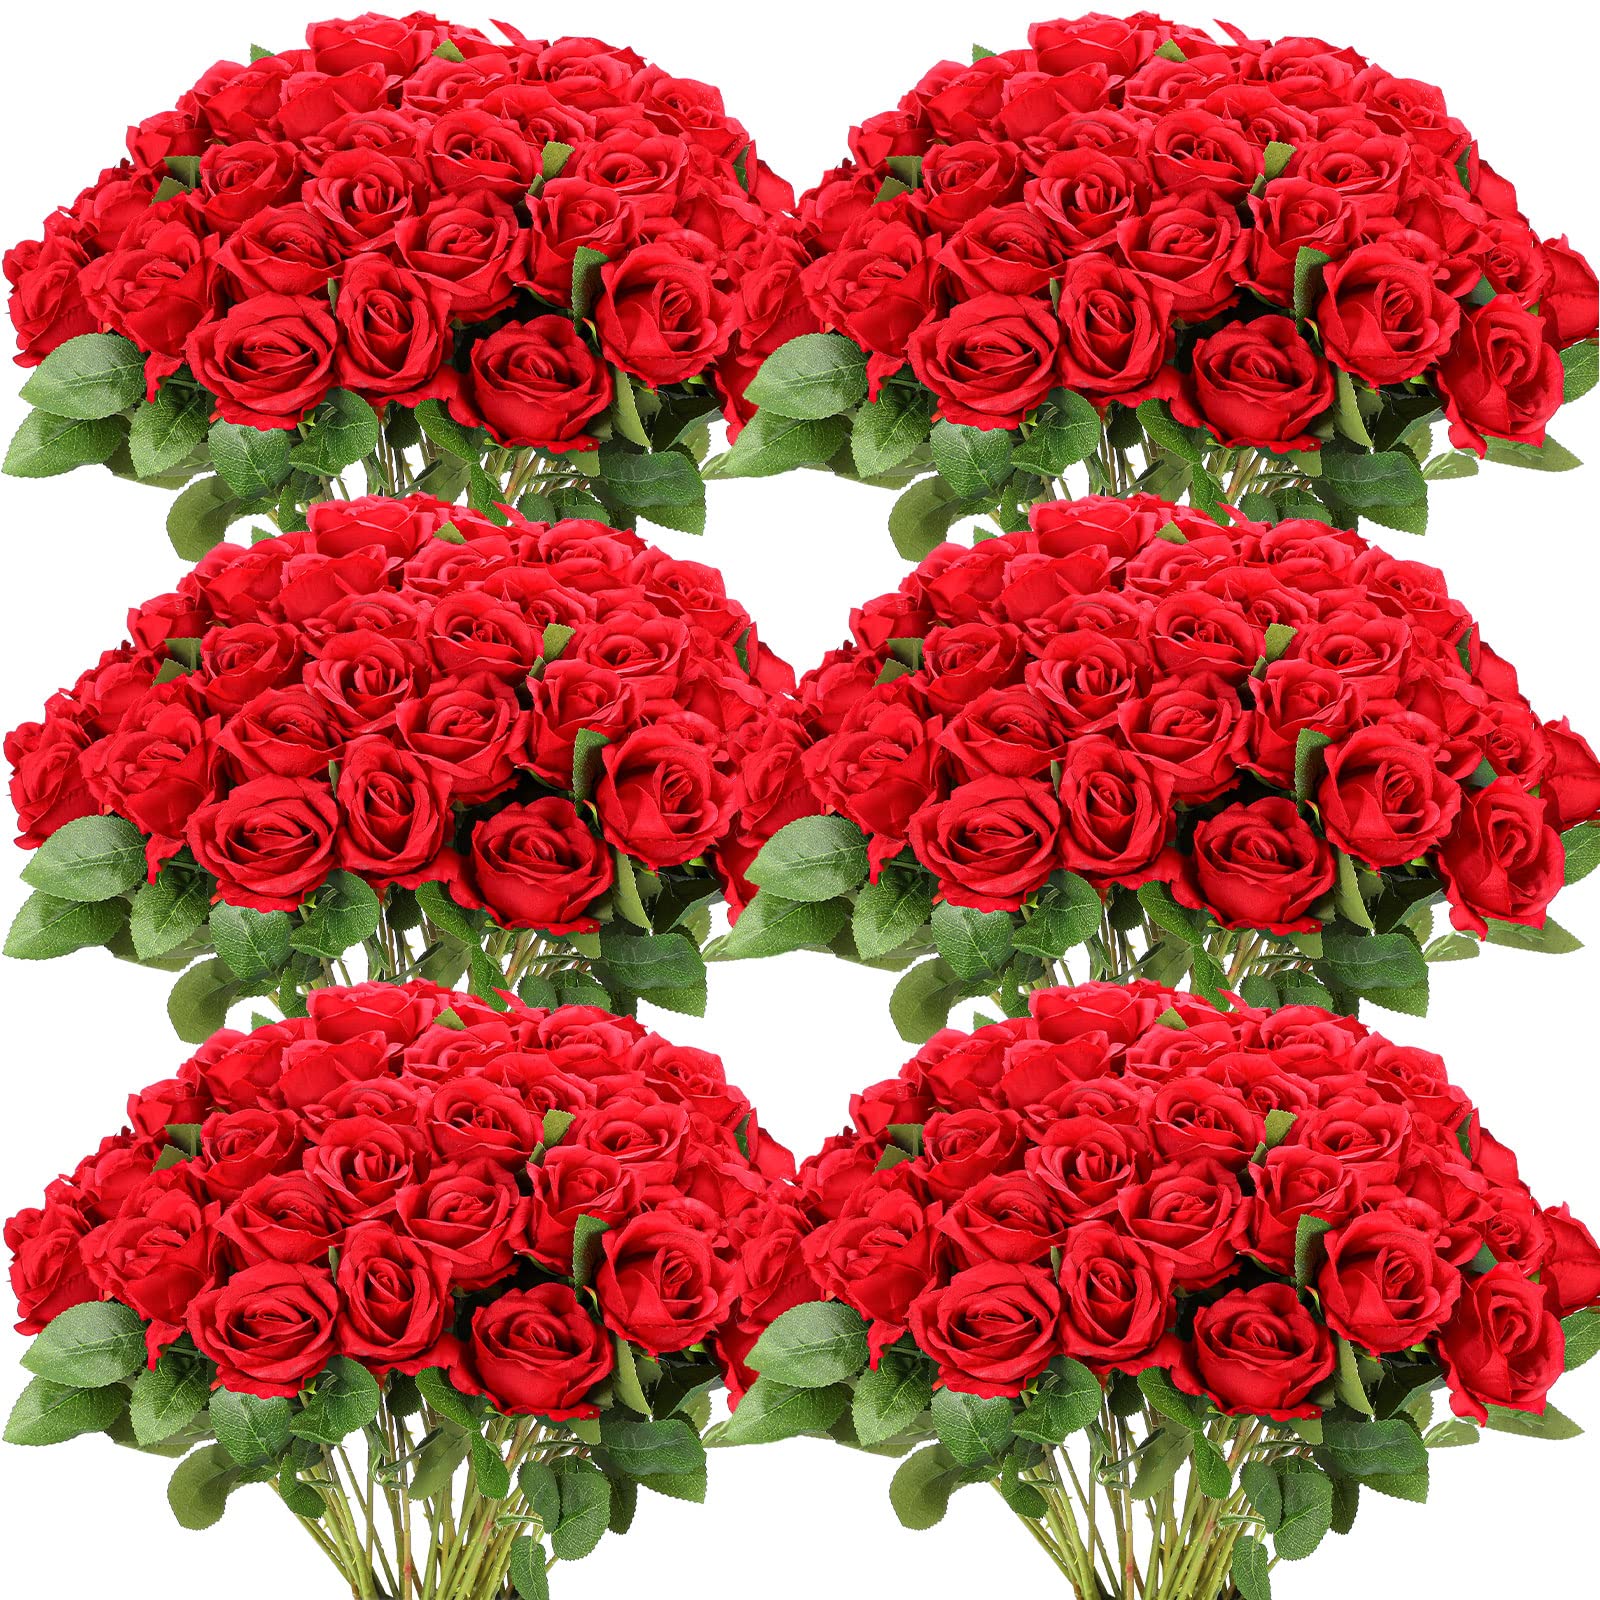 50 Pcs Artificial Rose Flower Realistic Silk Roses with Stem Bouquet of Flowers Plastic Flowers Real Looking Fake Roses for Home Wedding Centerpieces Party Decorations (Red)